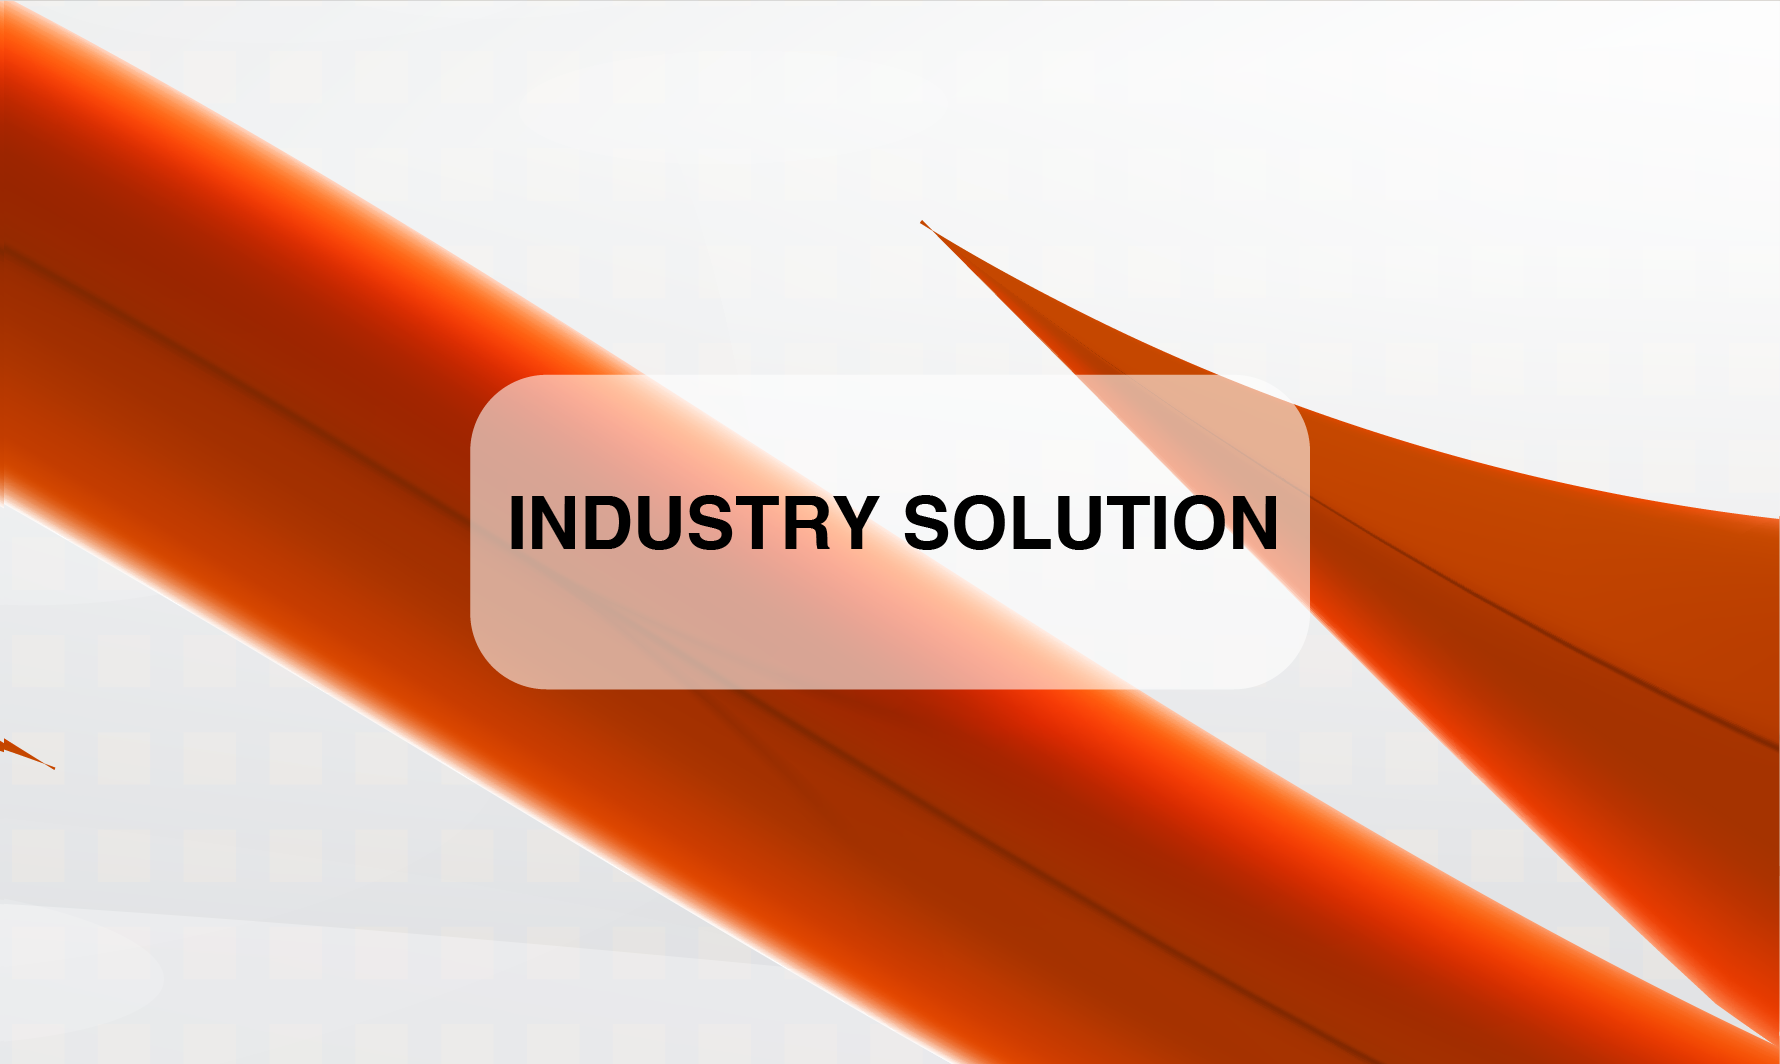 Industry Solution